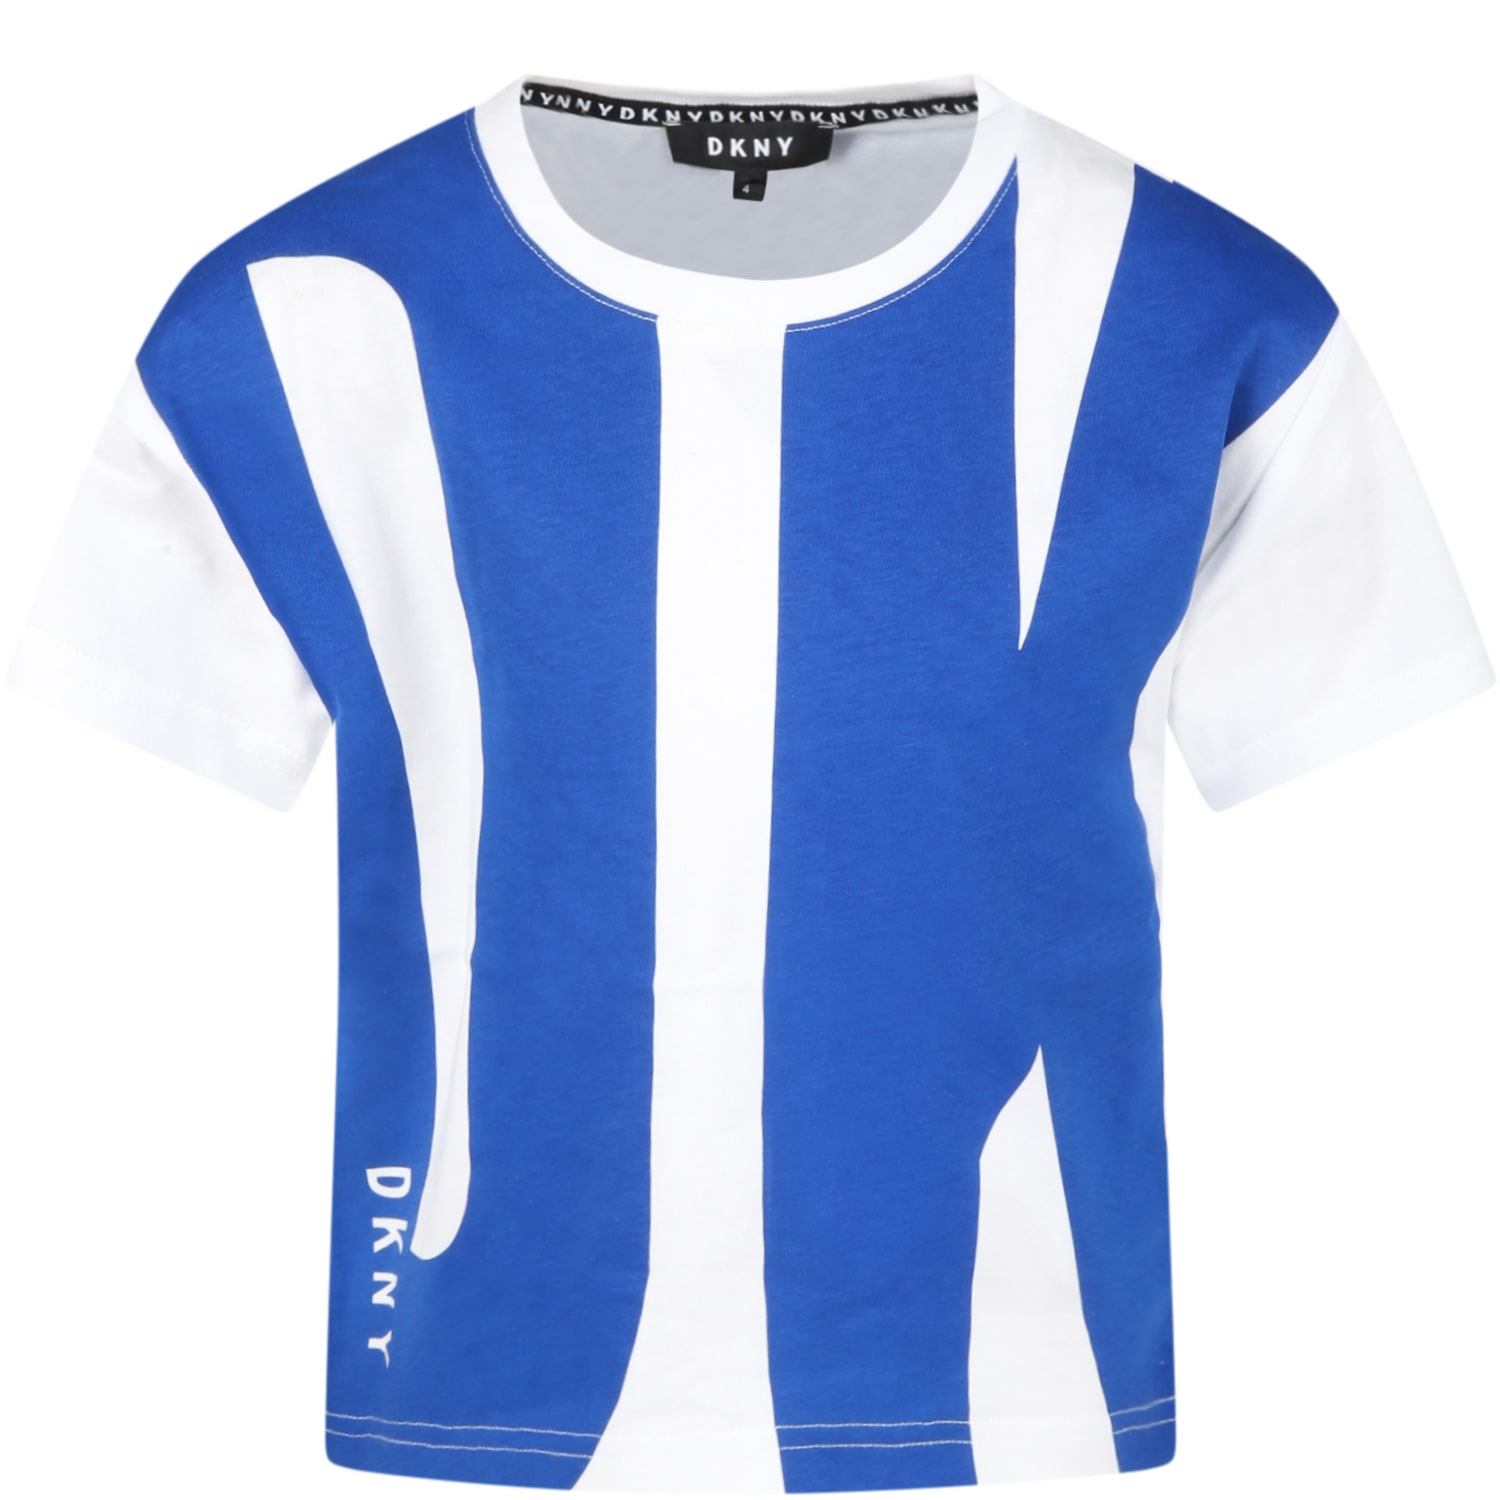 DKNY White T-shirt For Kids With Royal Blue Logo